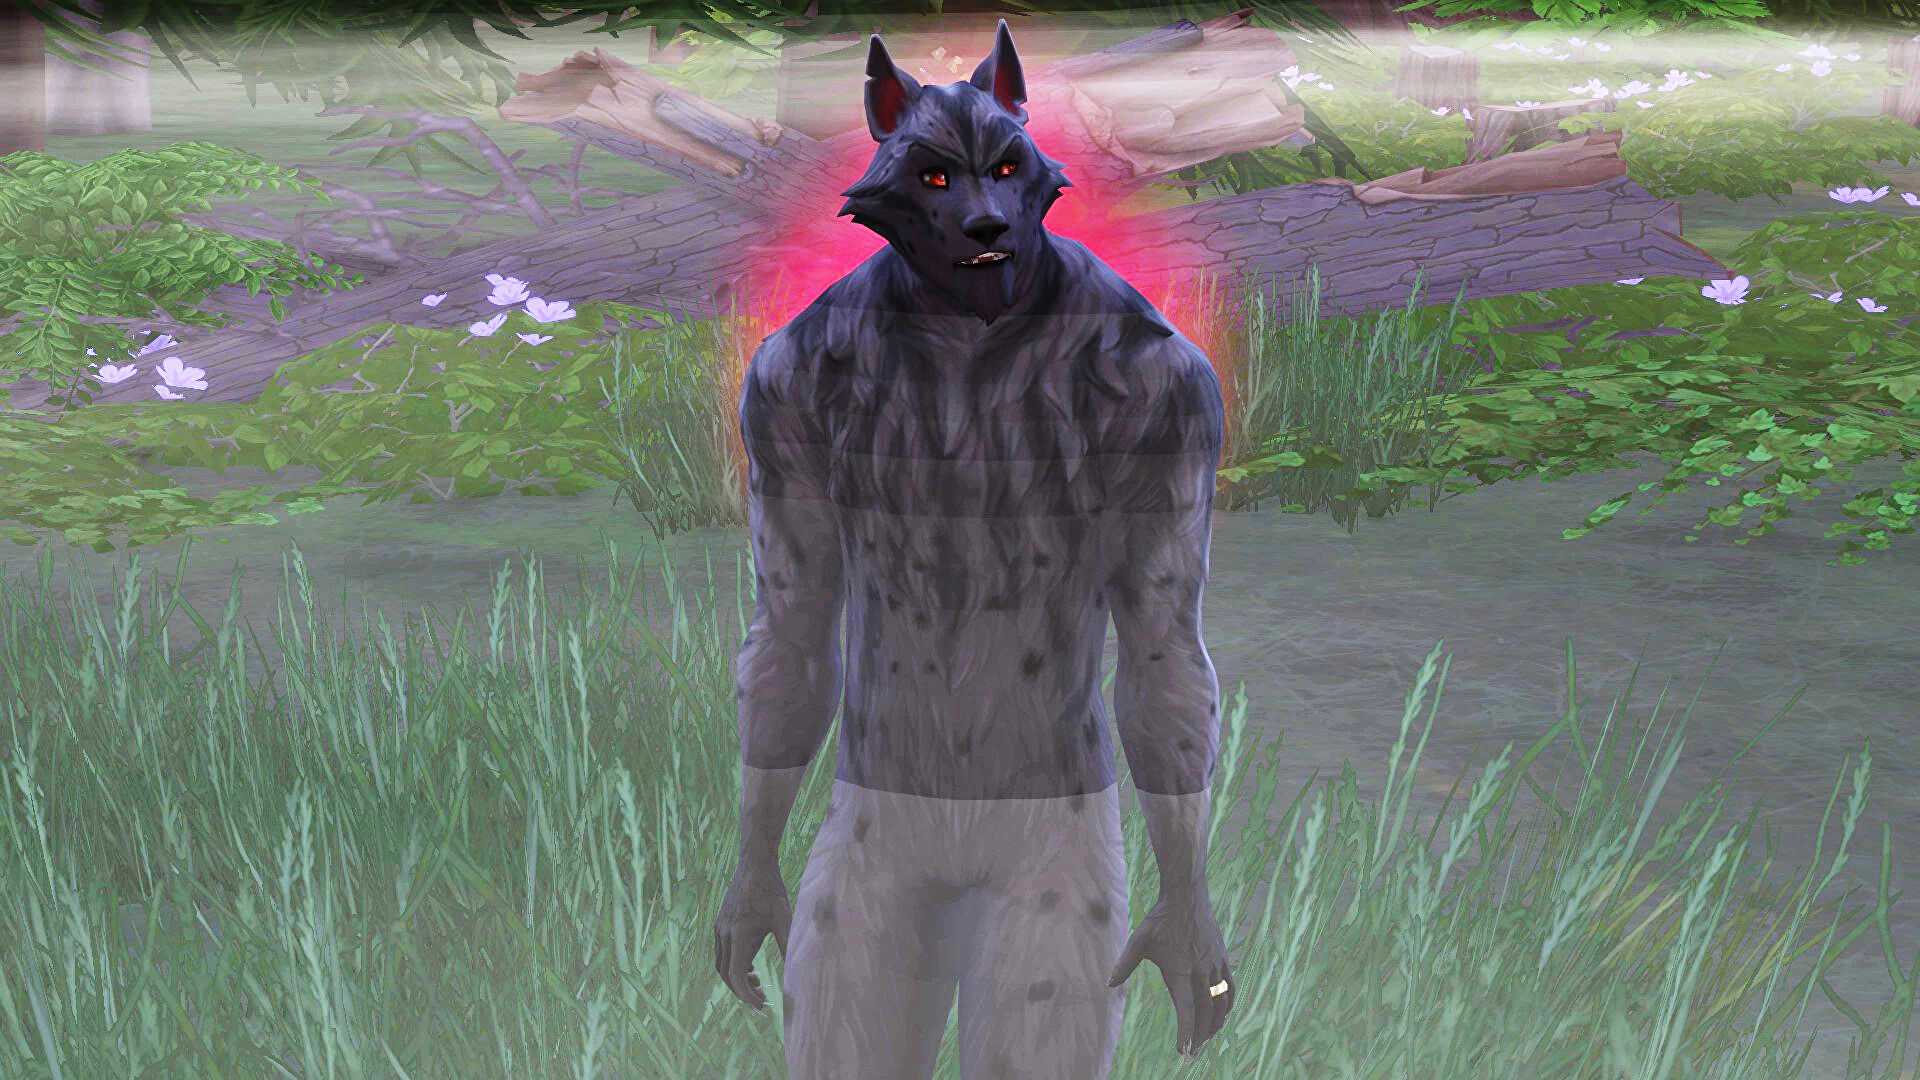 Sims 4 October bug laundry list includes werewolf bottom fury and even more incest